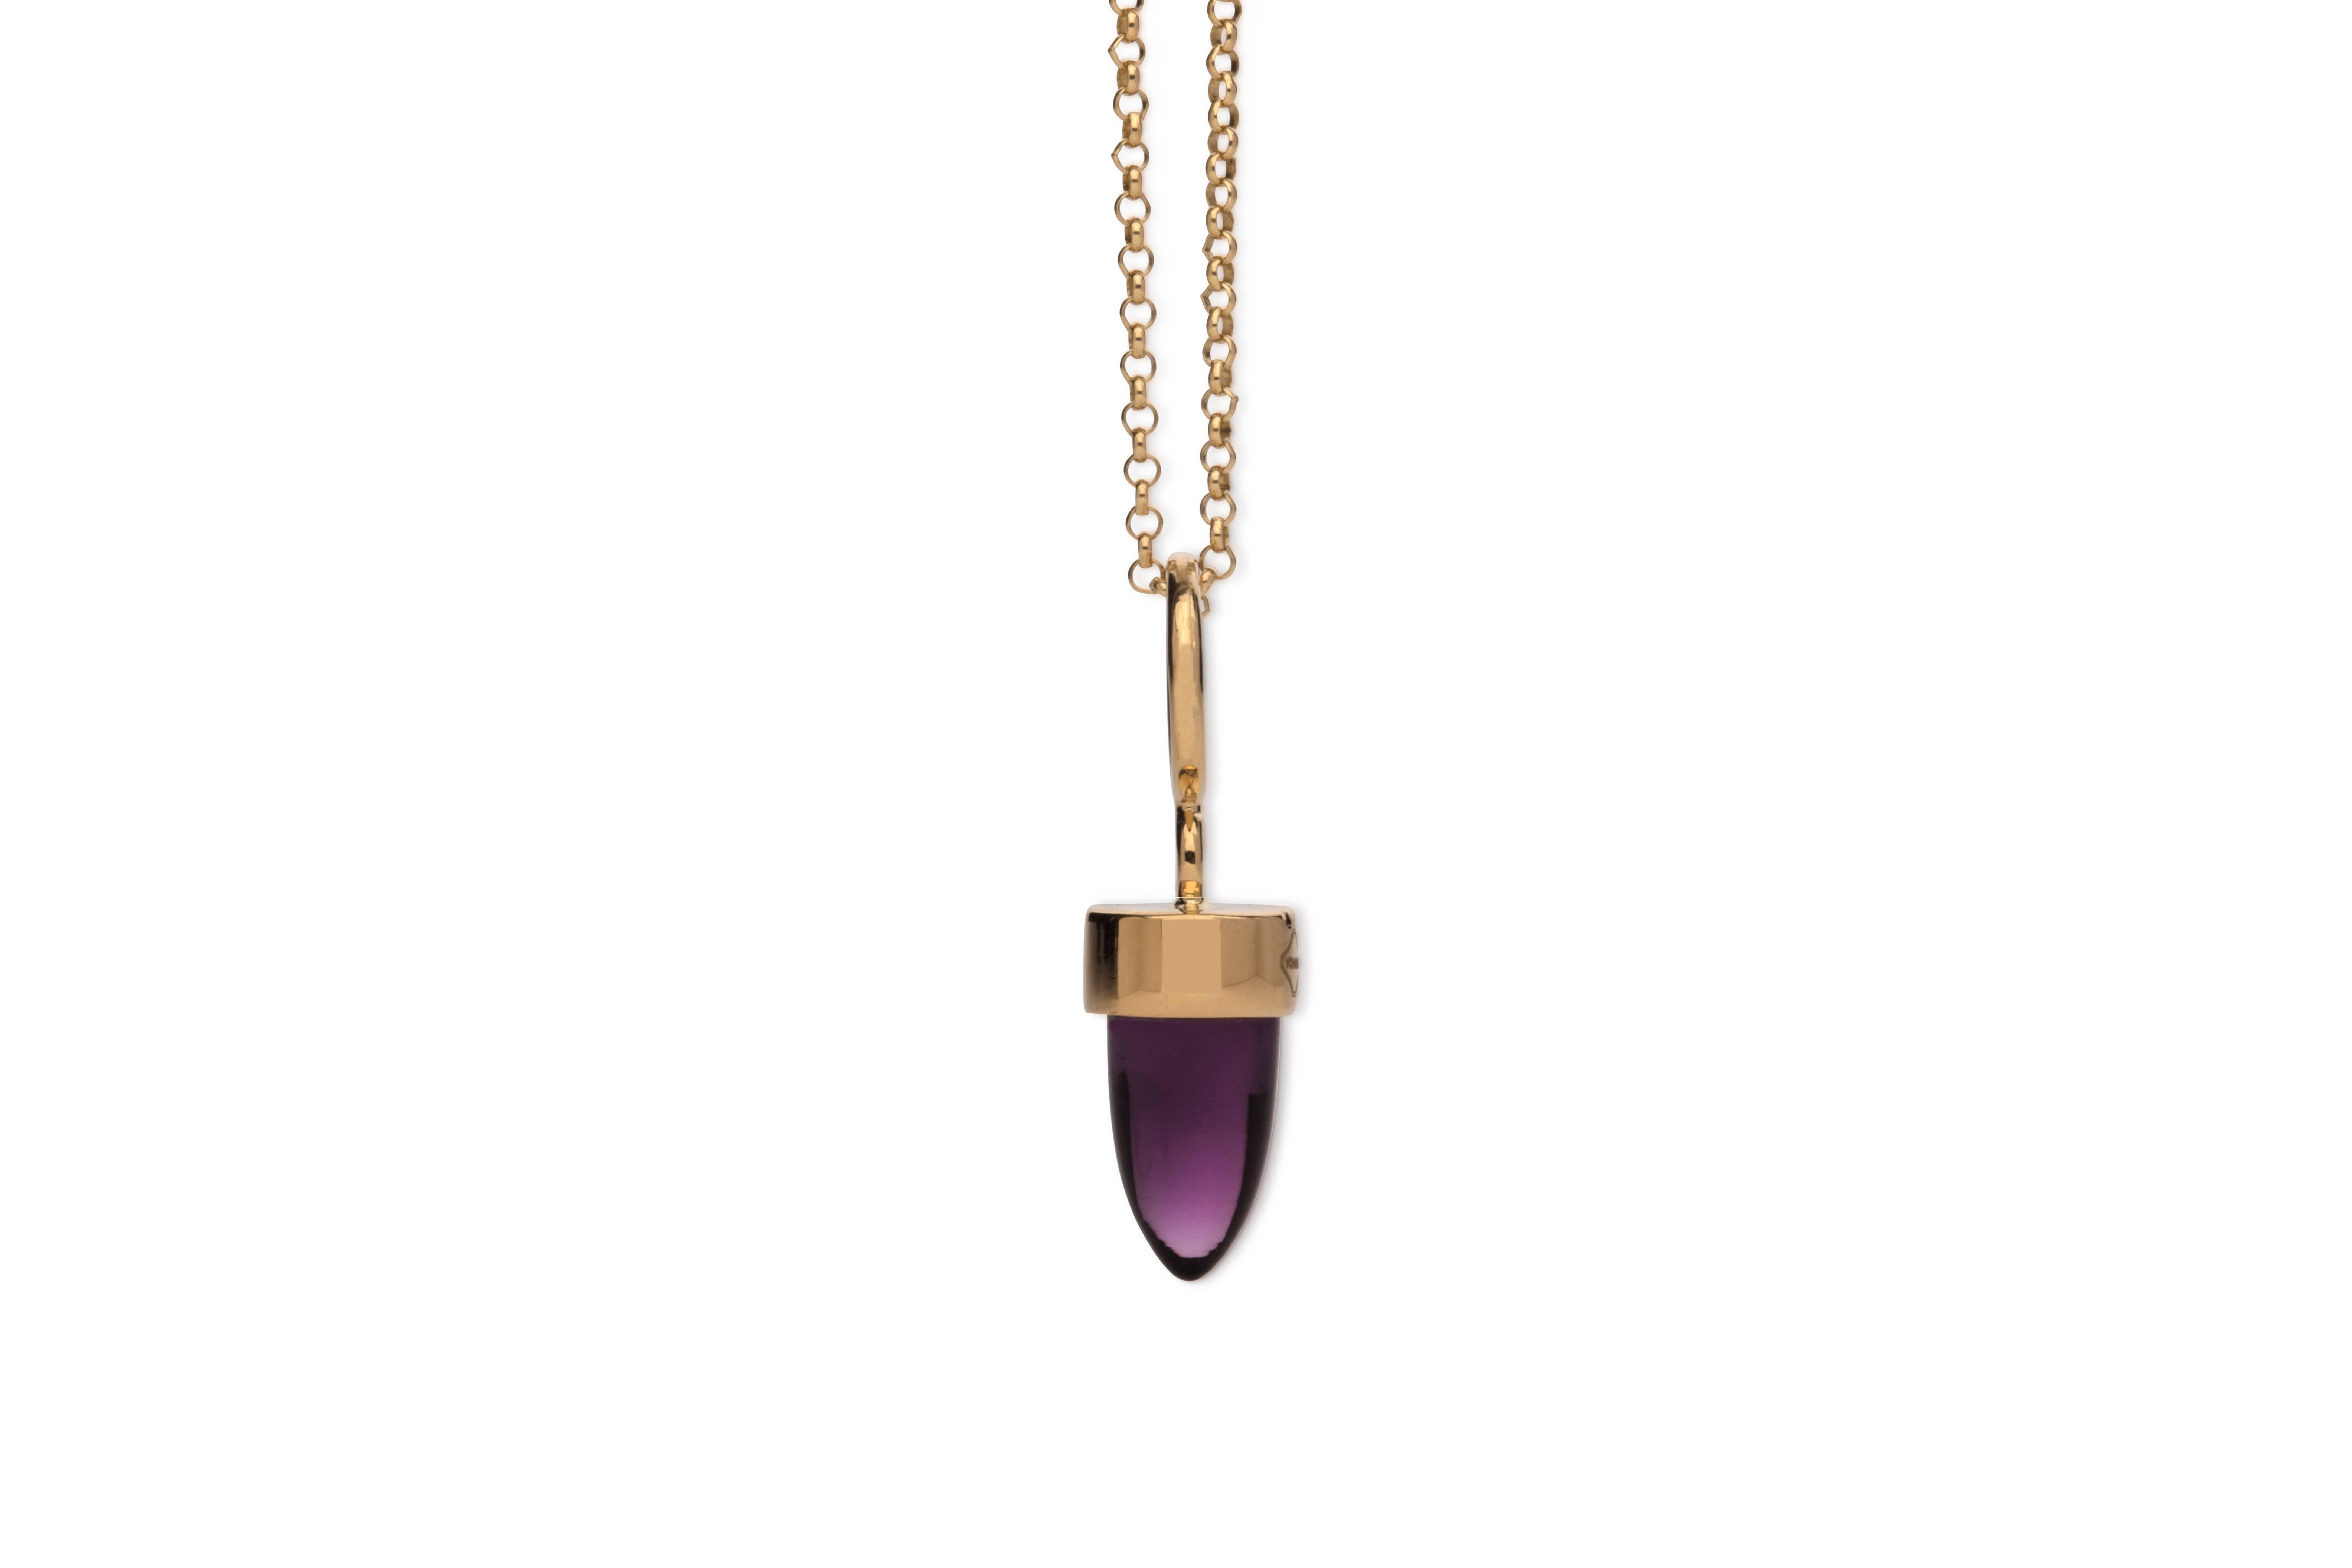 Colour stone modern Pink stone Quartz 18 kt Yellow solid Gold Pendant necklace  For Sale 5